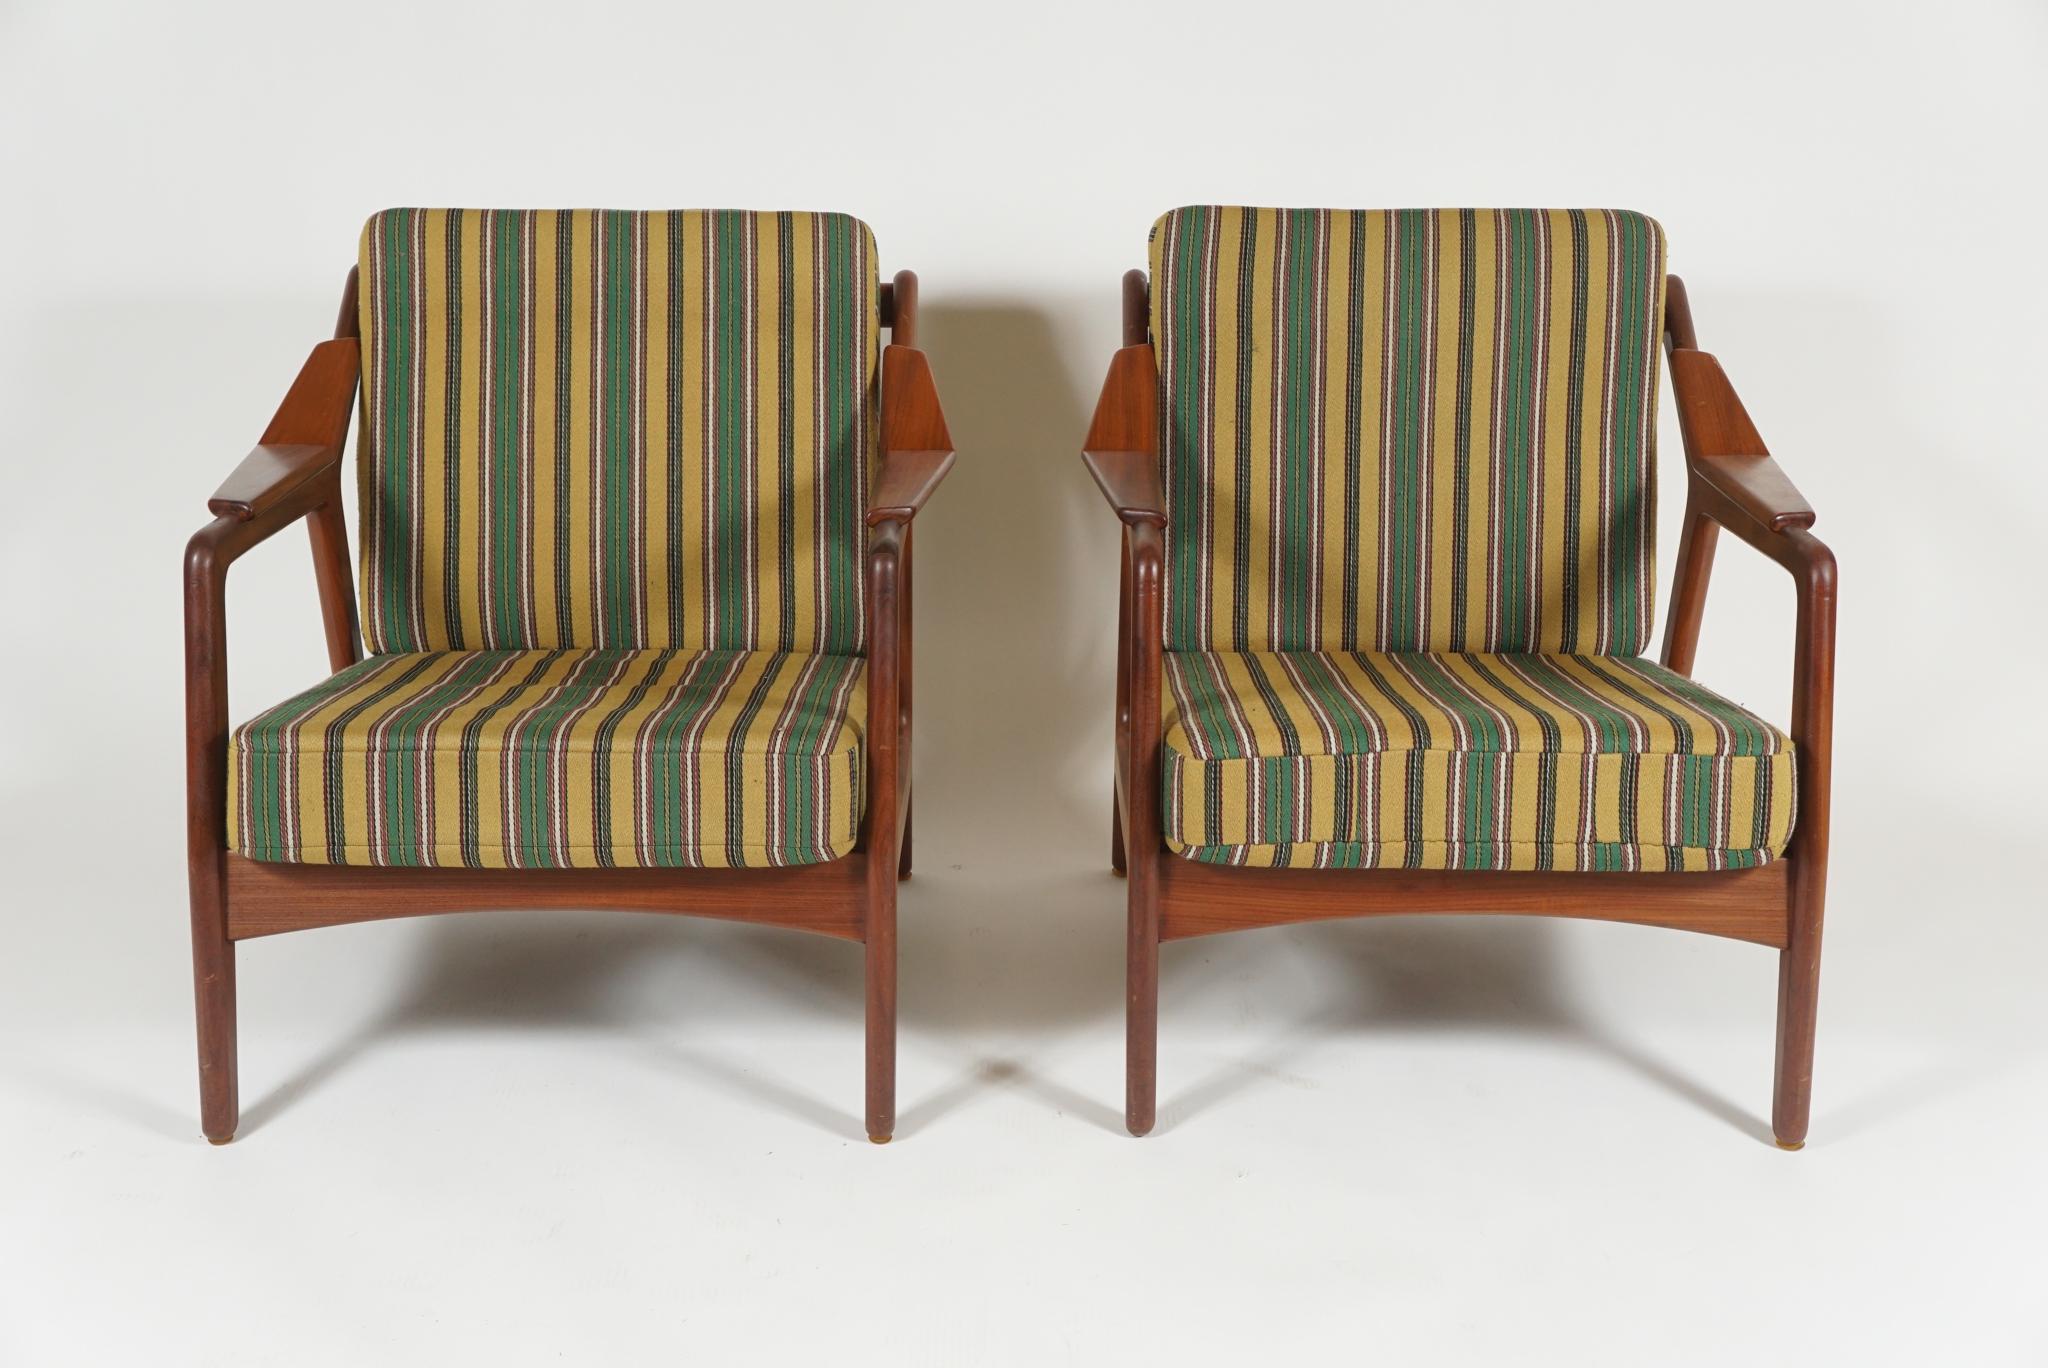 A pair of armchairs by H. Brockmann Pedersen, Danish designer from 1950s, 1960s in cherry, exceptional quality with striking angled
arms a signature of Pedersen's work. Covered in original striped fabric.